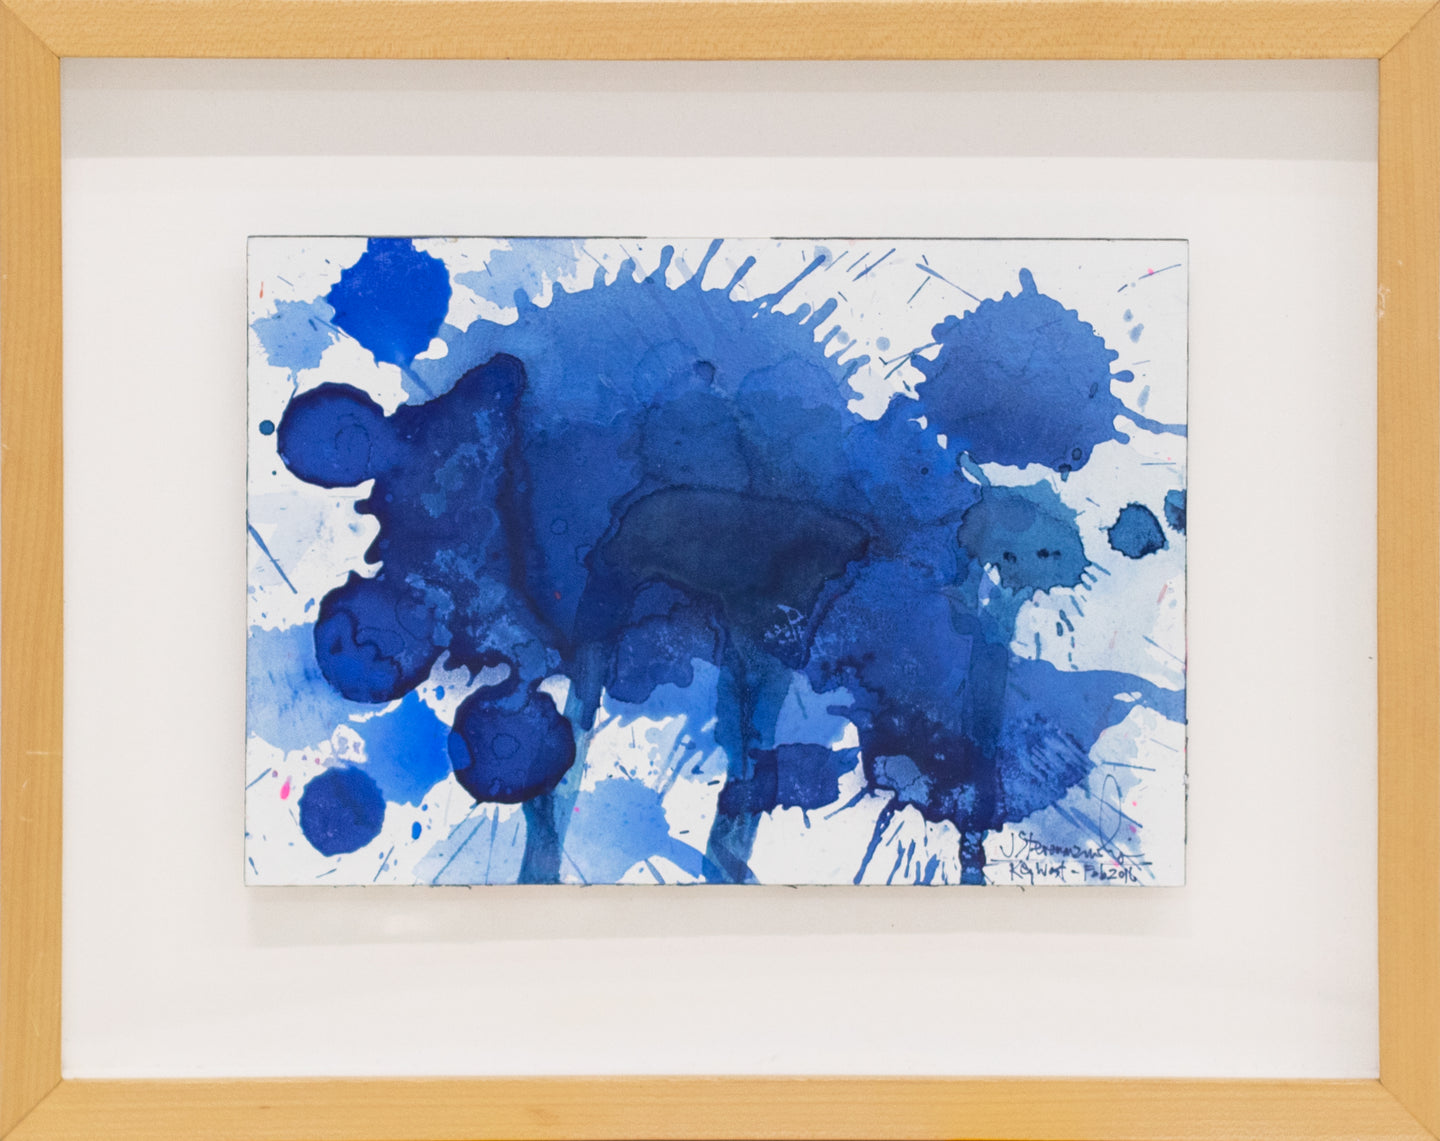 J. Steven Manolis, Splash (Key West), 07.10.08, Watercolor painting on Arches paper, 2016, 7 x 10 inches, Blue Abstract Art, Splash Art for sale at Manolis Projects Art Gallery, Miami, Fl